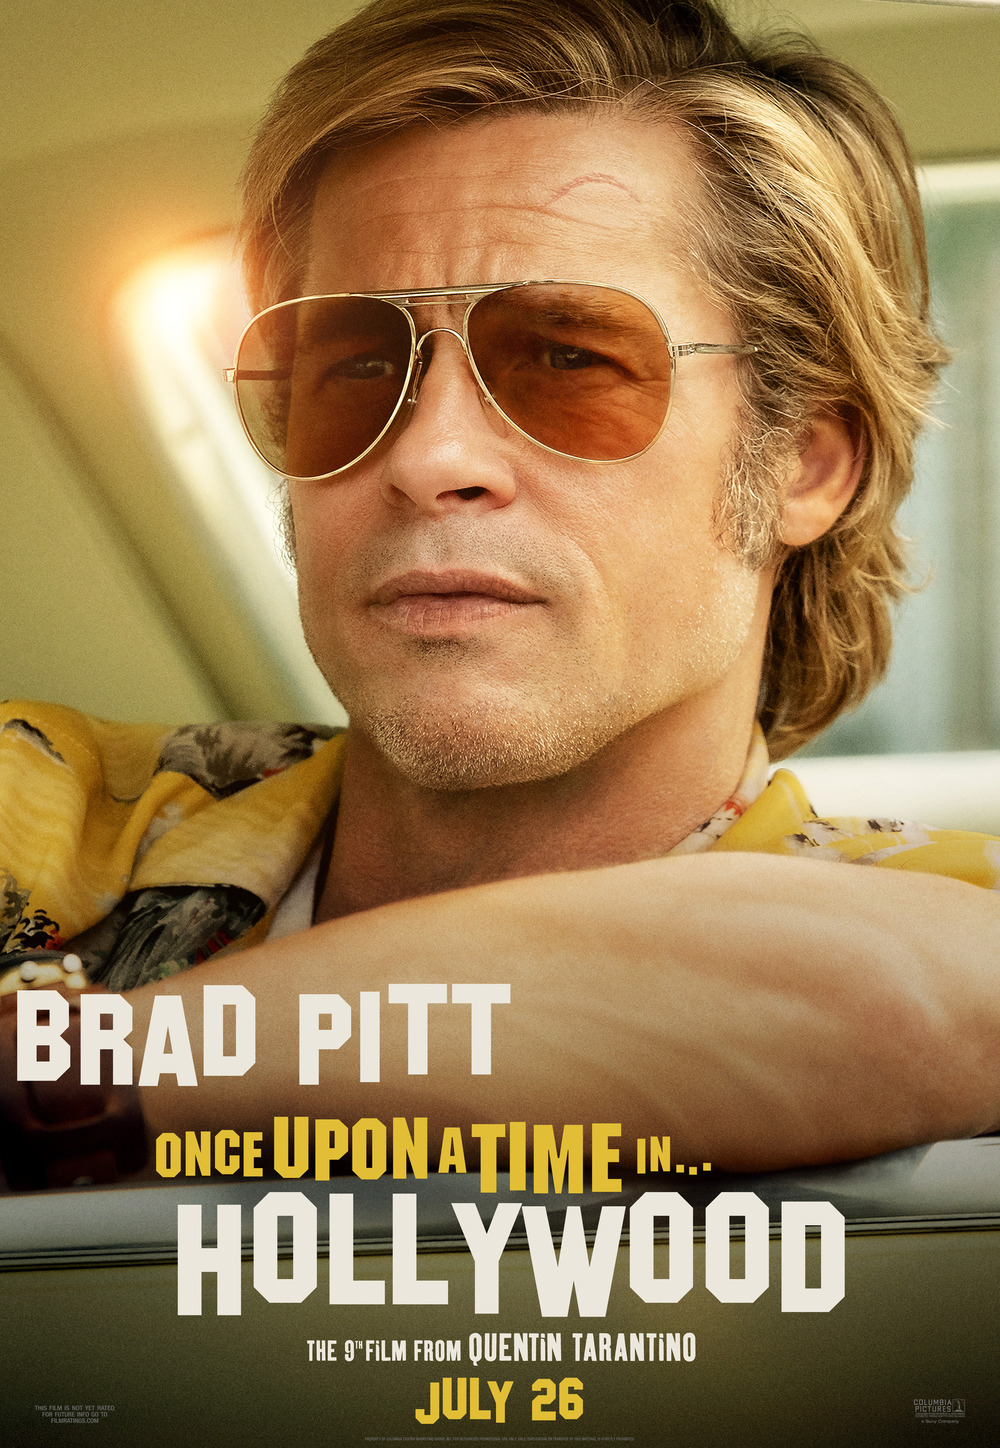 Once Upon A Time In Hollywood Dvd Release Date Redbox Netflix Itunes Amazon